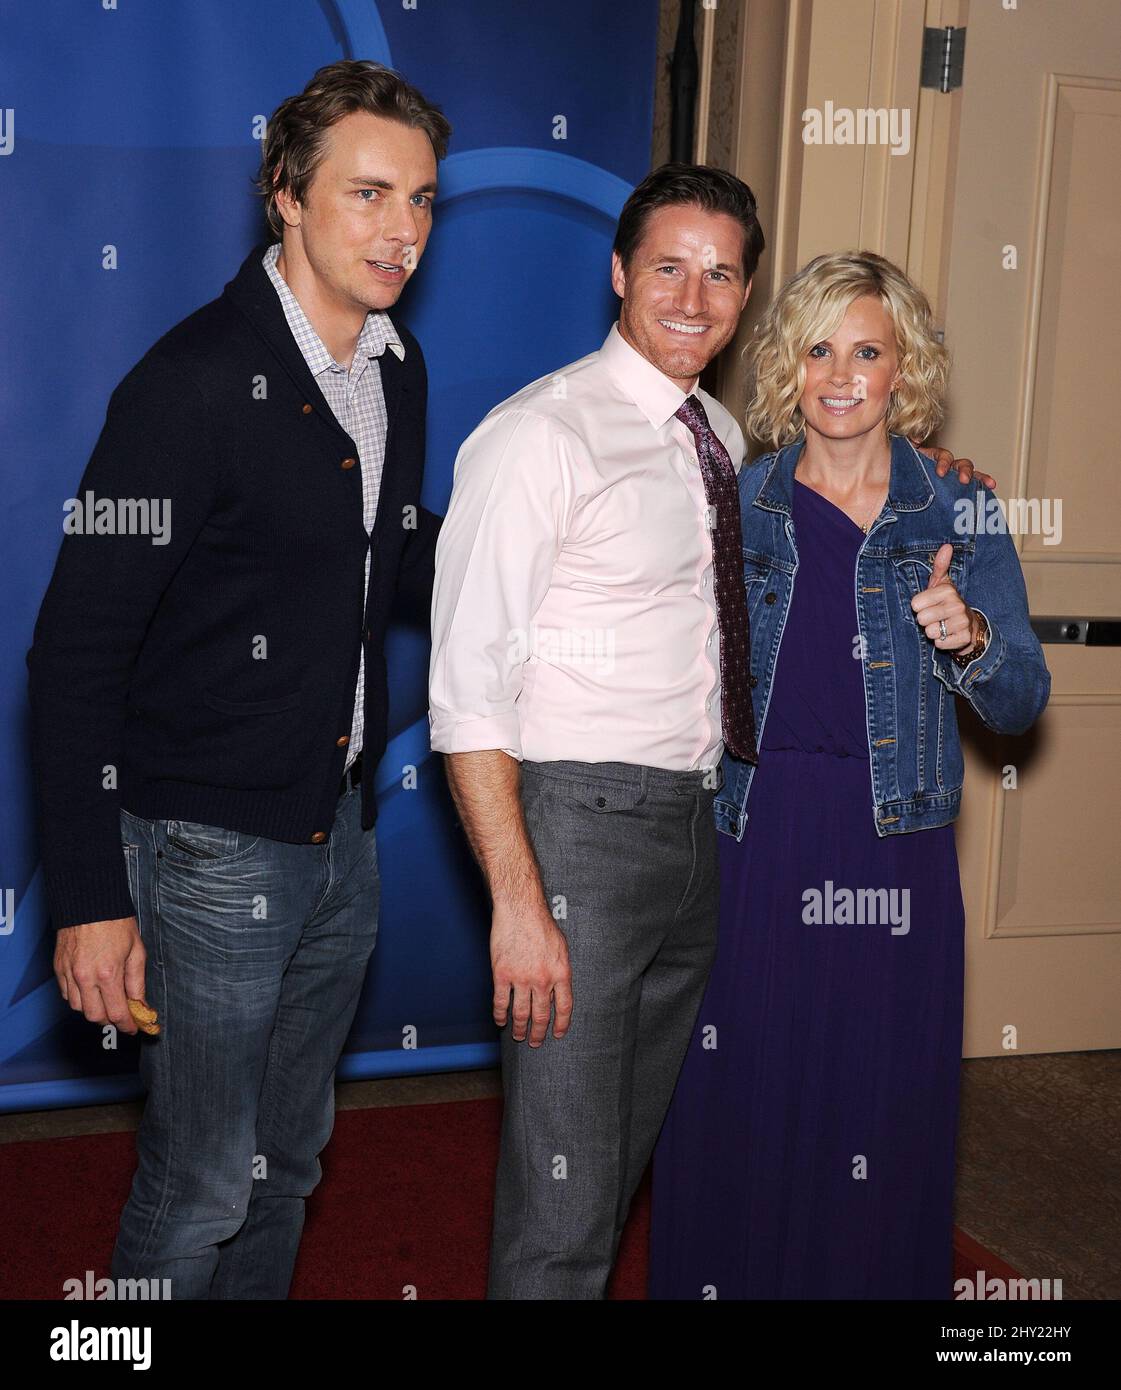 Dax Shepard, Sam Jaeger & Monica Potter attending the NBCUniversal Summer 2013 TCA Press Tour in Los Angeles, California. Stock Photo